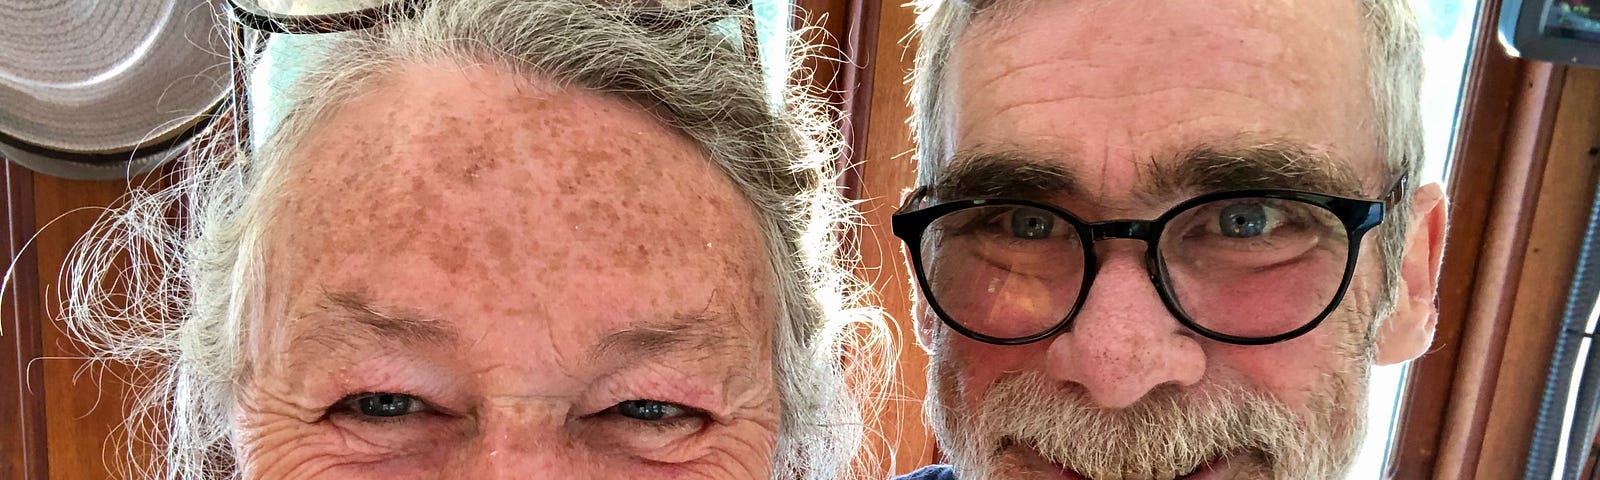 Two faces appear in the photo. Both are seniors with grey hair and both are smiling.